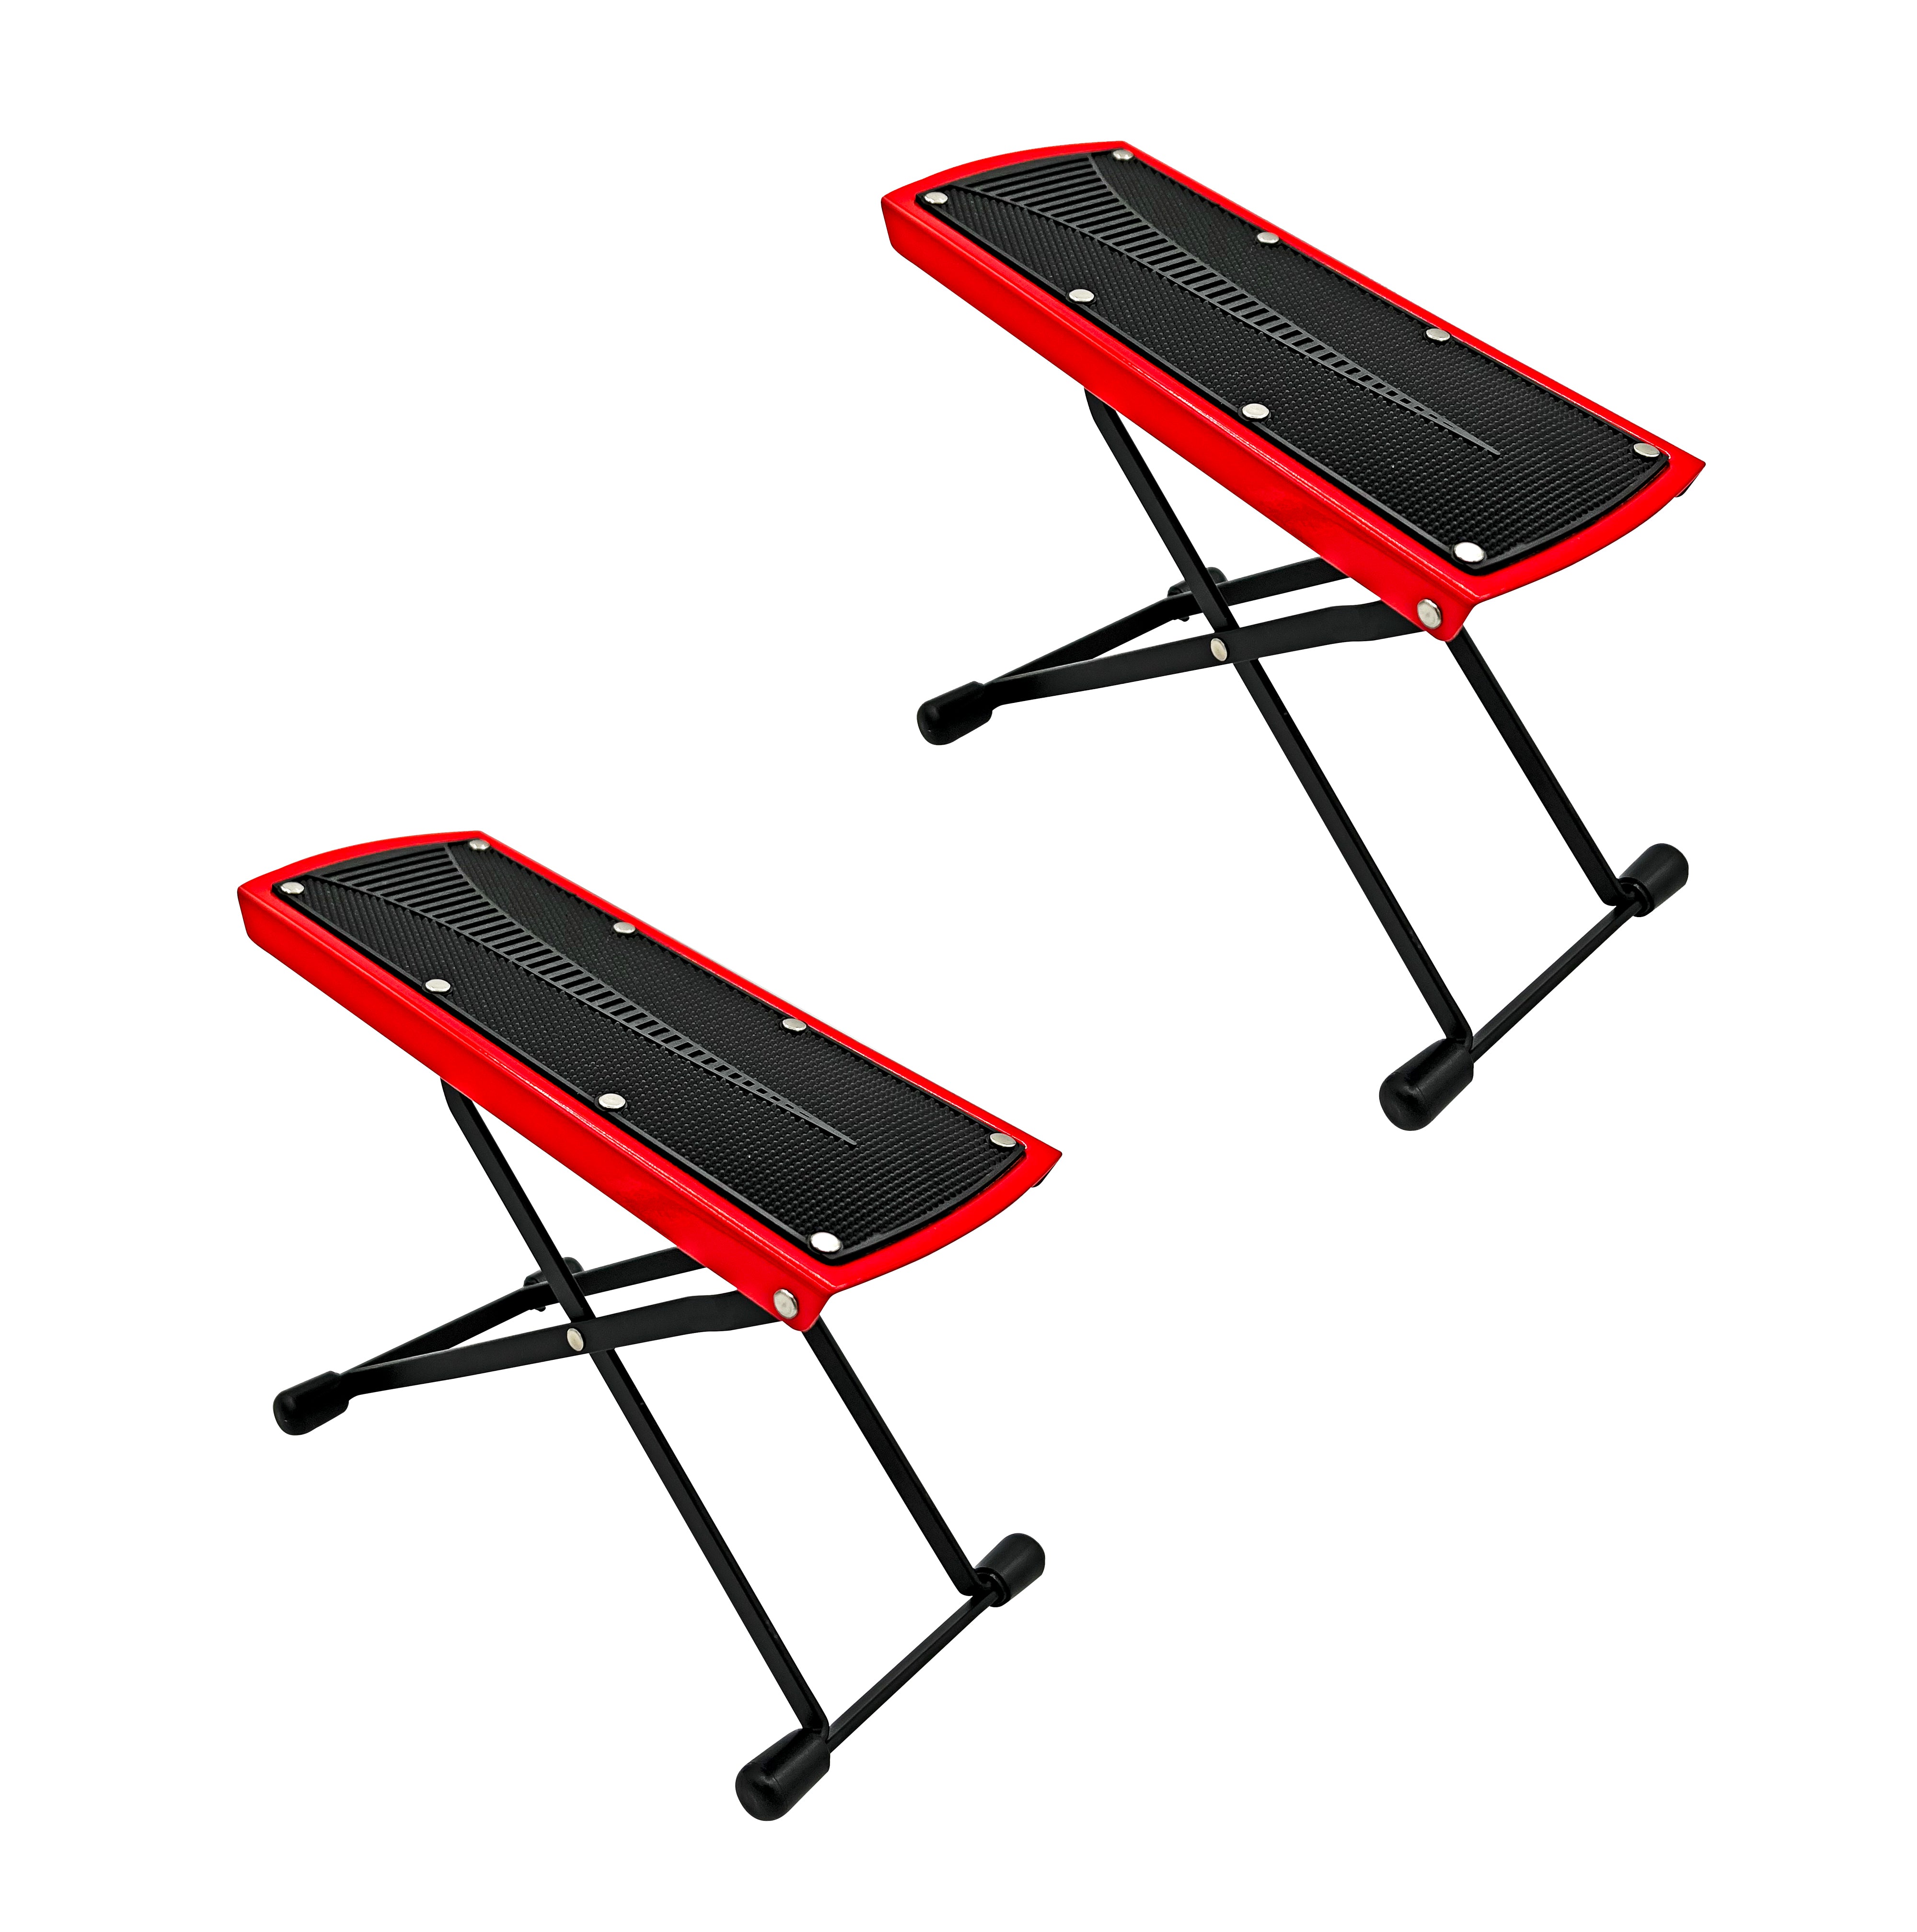 5Core Guitar Foot Rest Stand 6 Level Adjustable Leg Footrest Sool Rubber Pad Stable 1/2 Pc Red